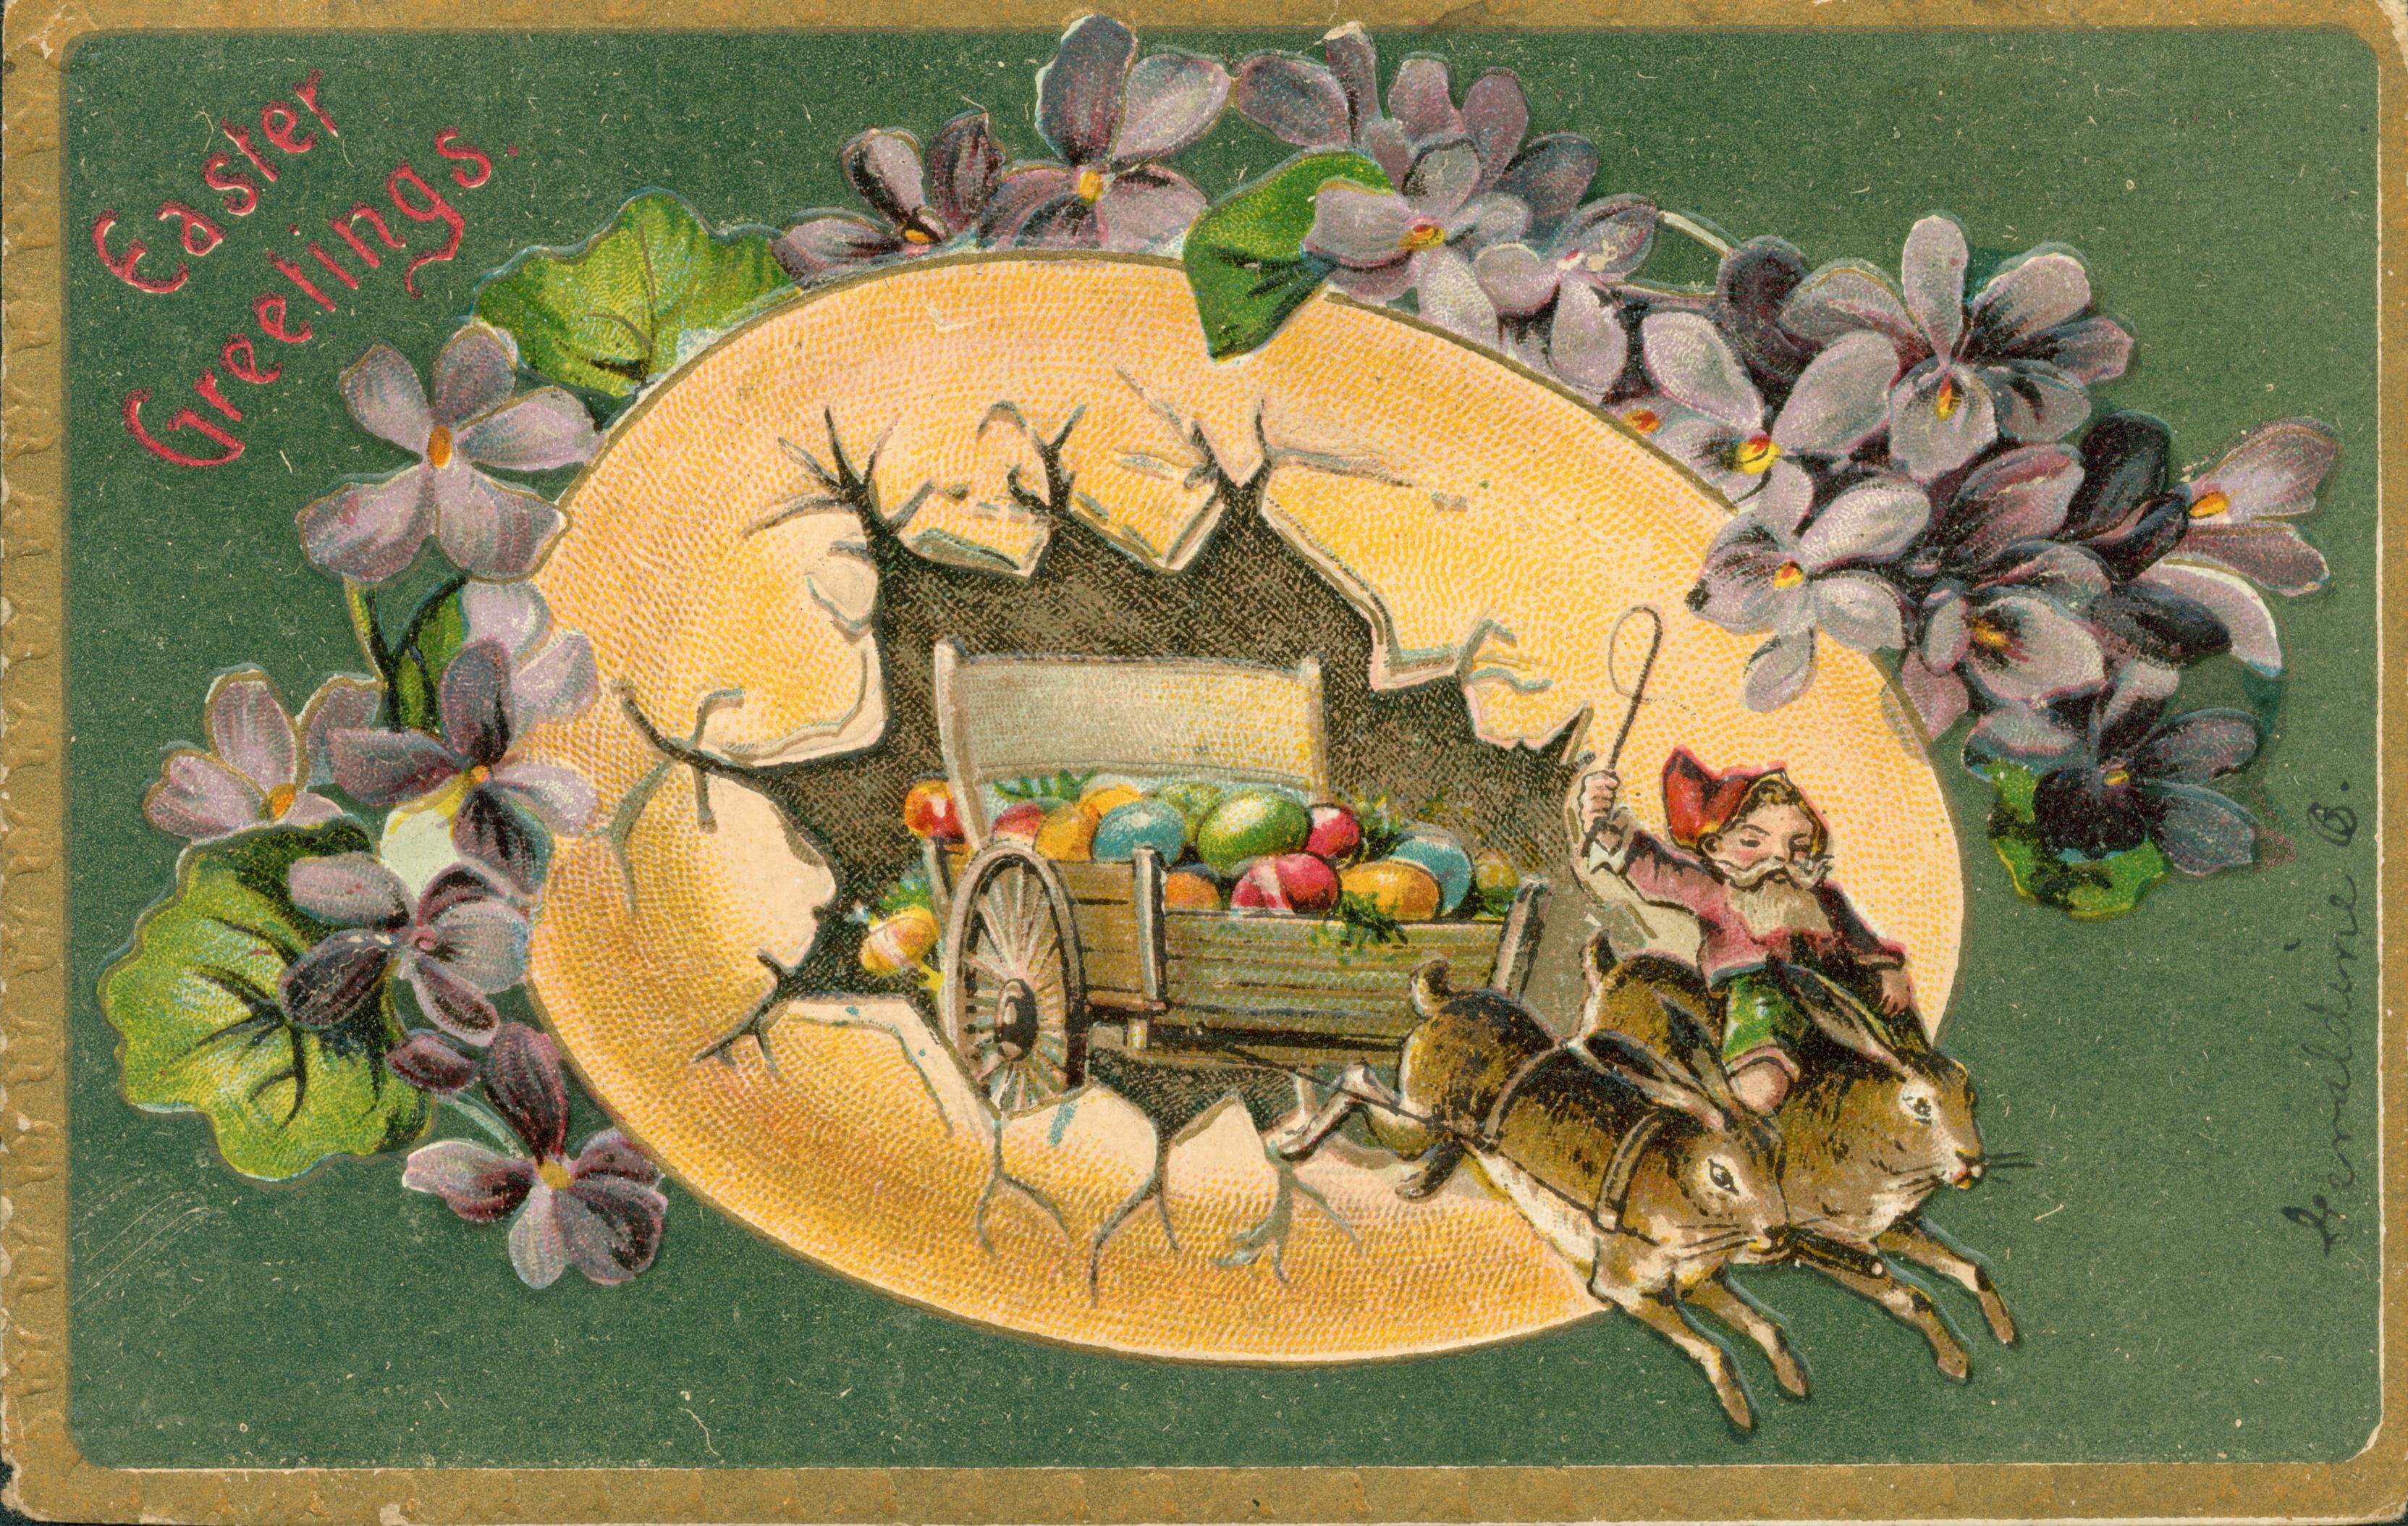 Image of a cart of colored eggs being pulled by rabbits out of a large egg surrounded by flowers.